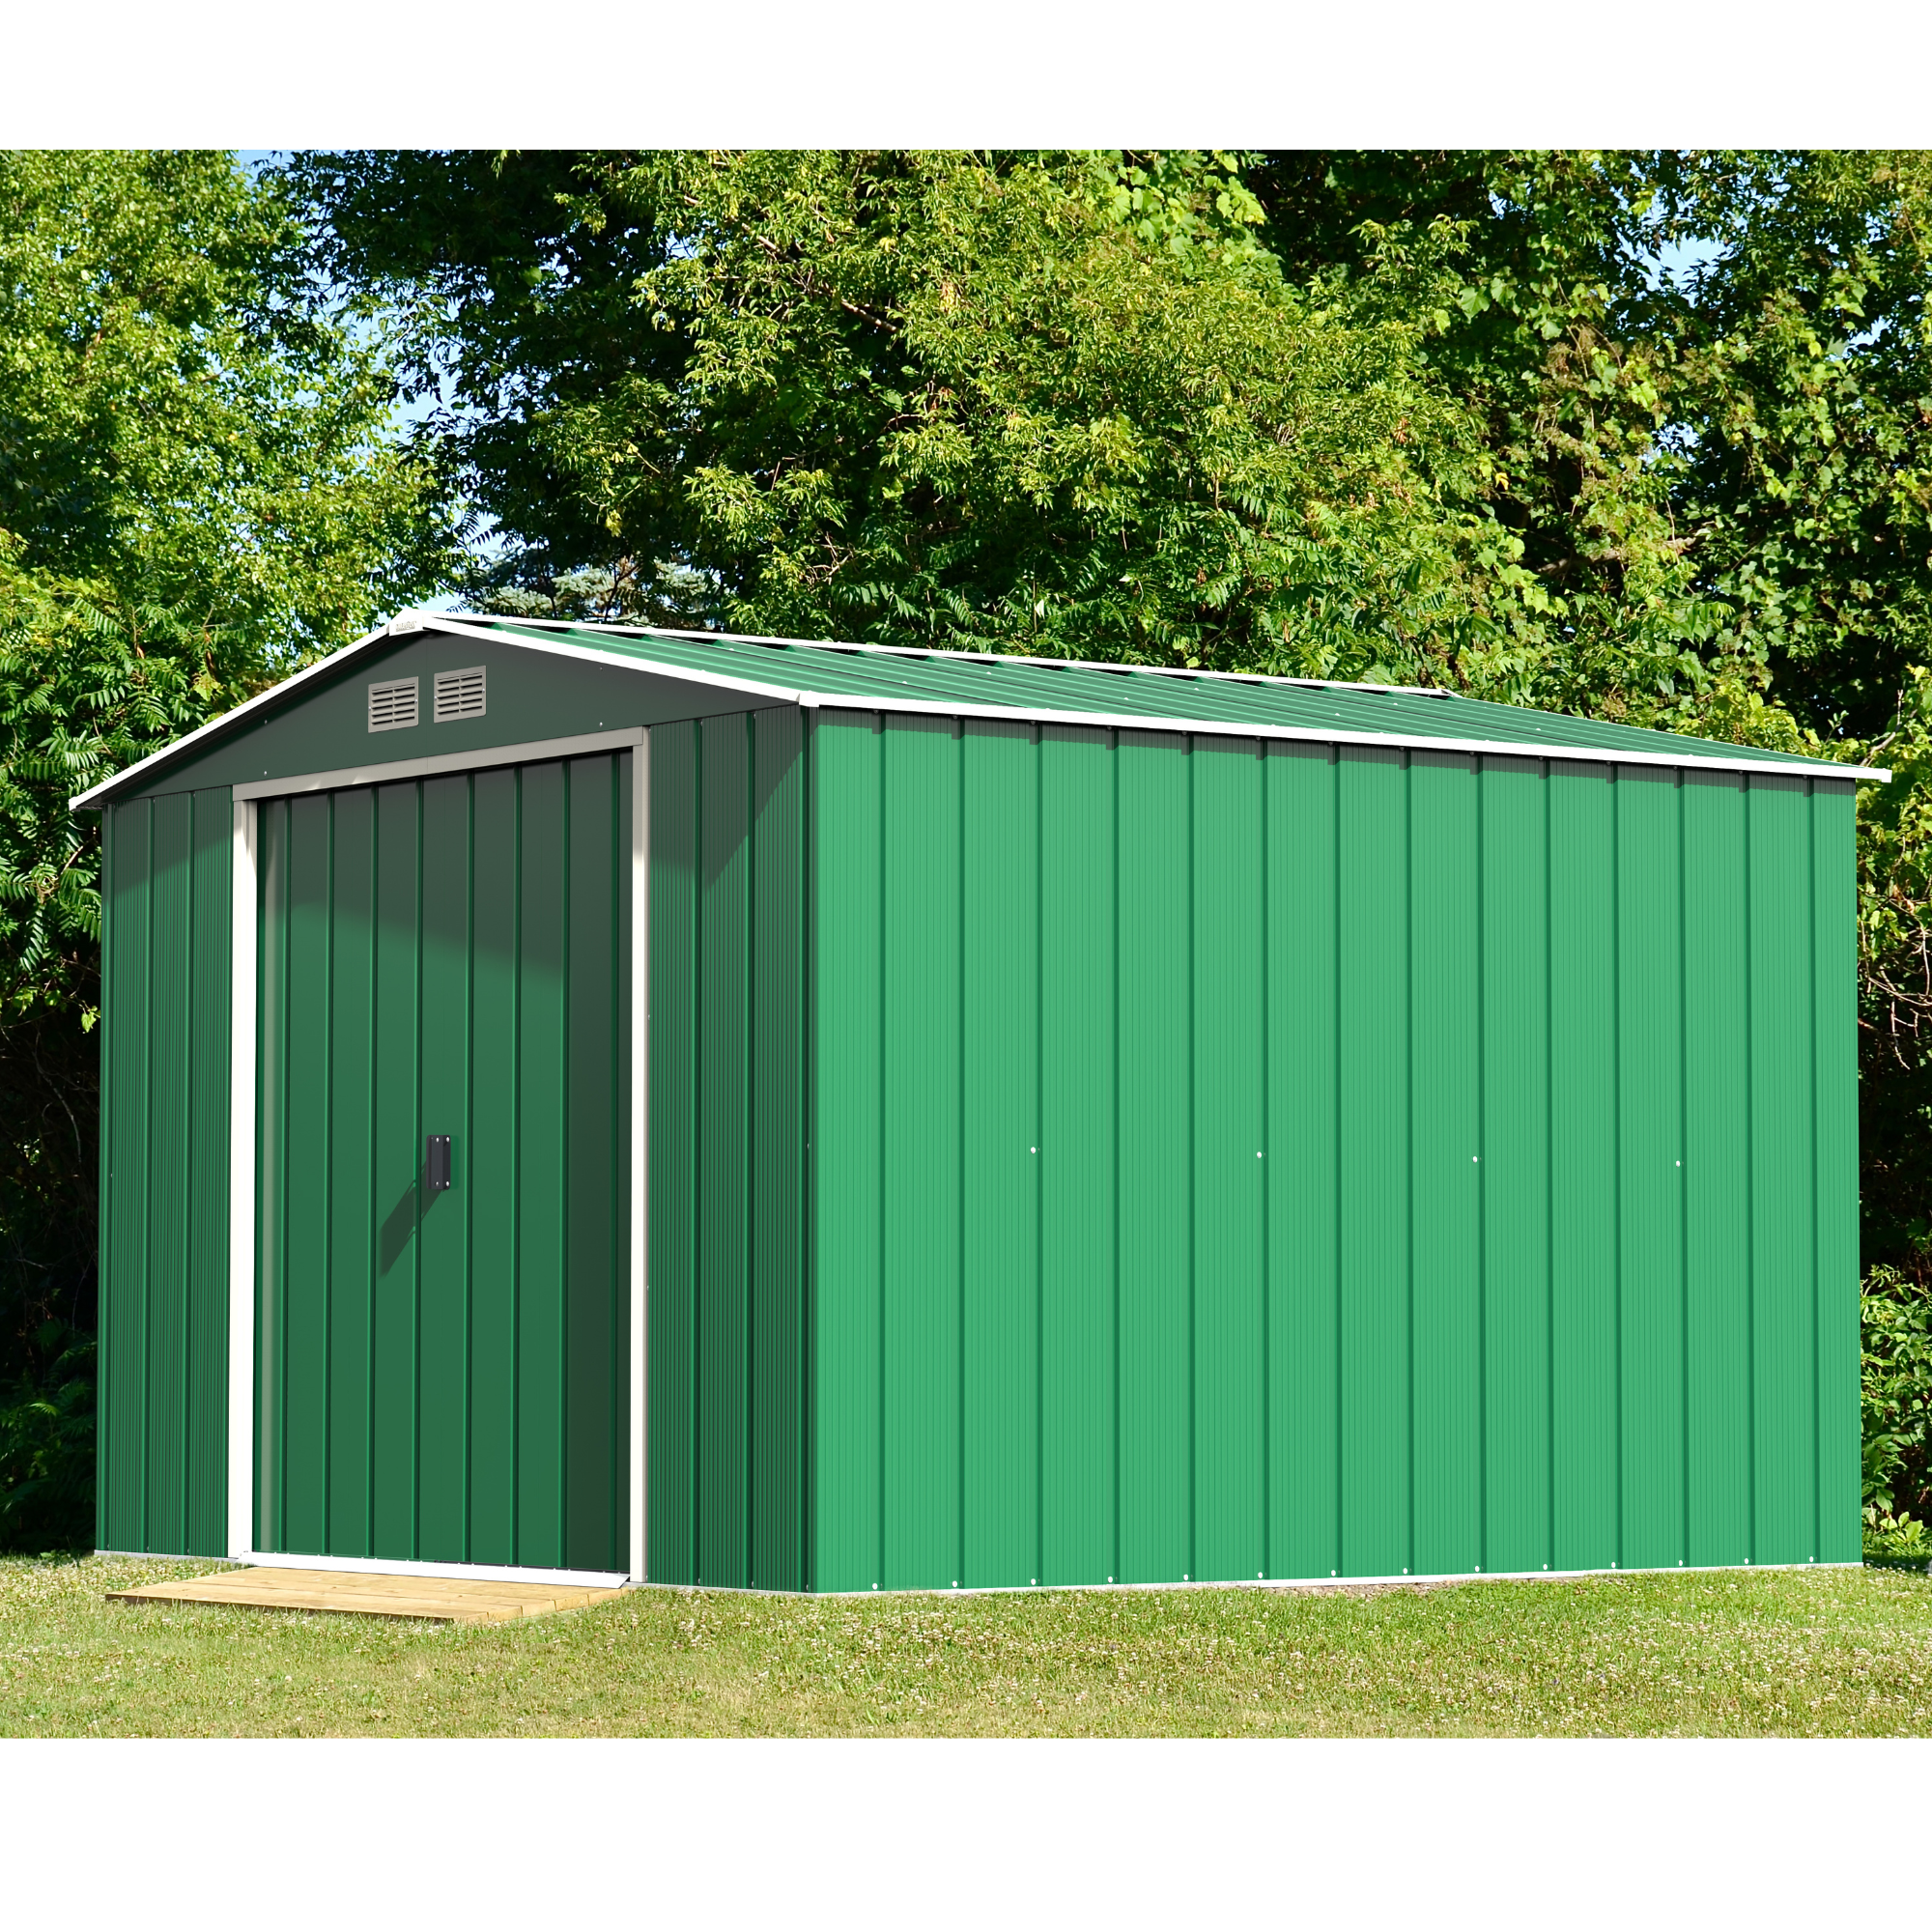 Image of BillyOh Partner Eco Apex Roof Metal Shed - 10x10 Apex Eco